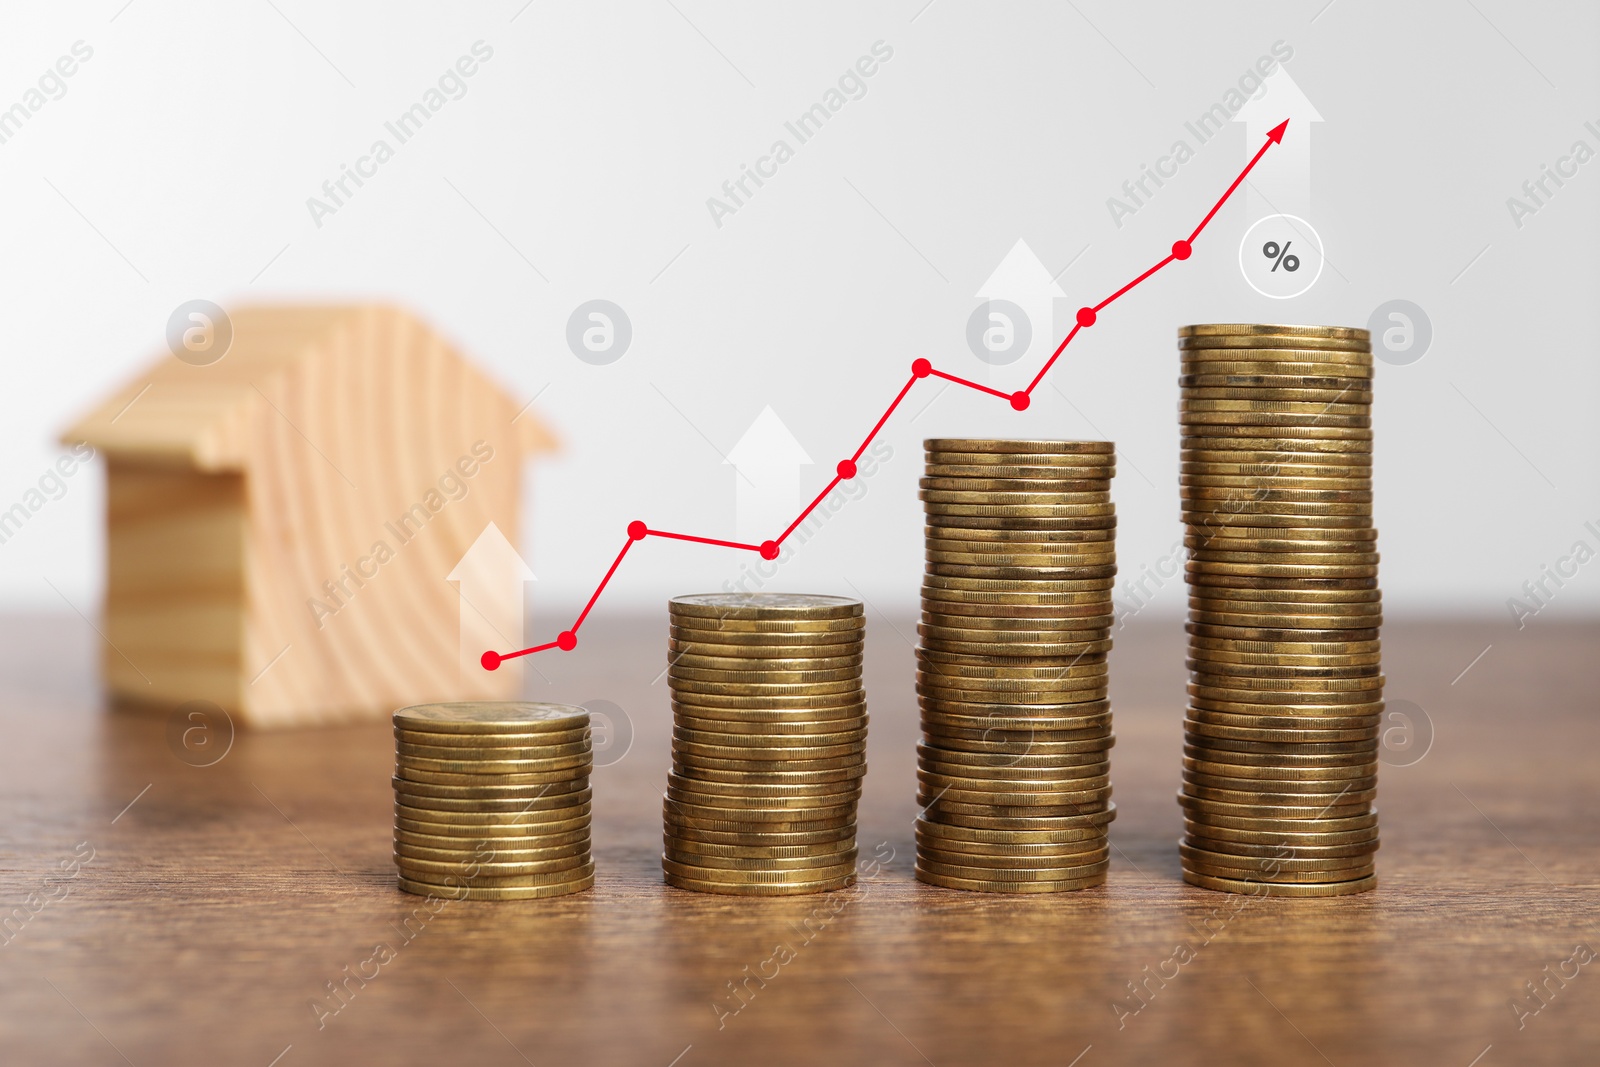 Image of Mortgage rate. Stacked coins, arrows, graph and model of house